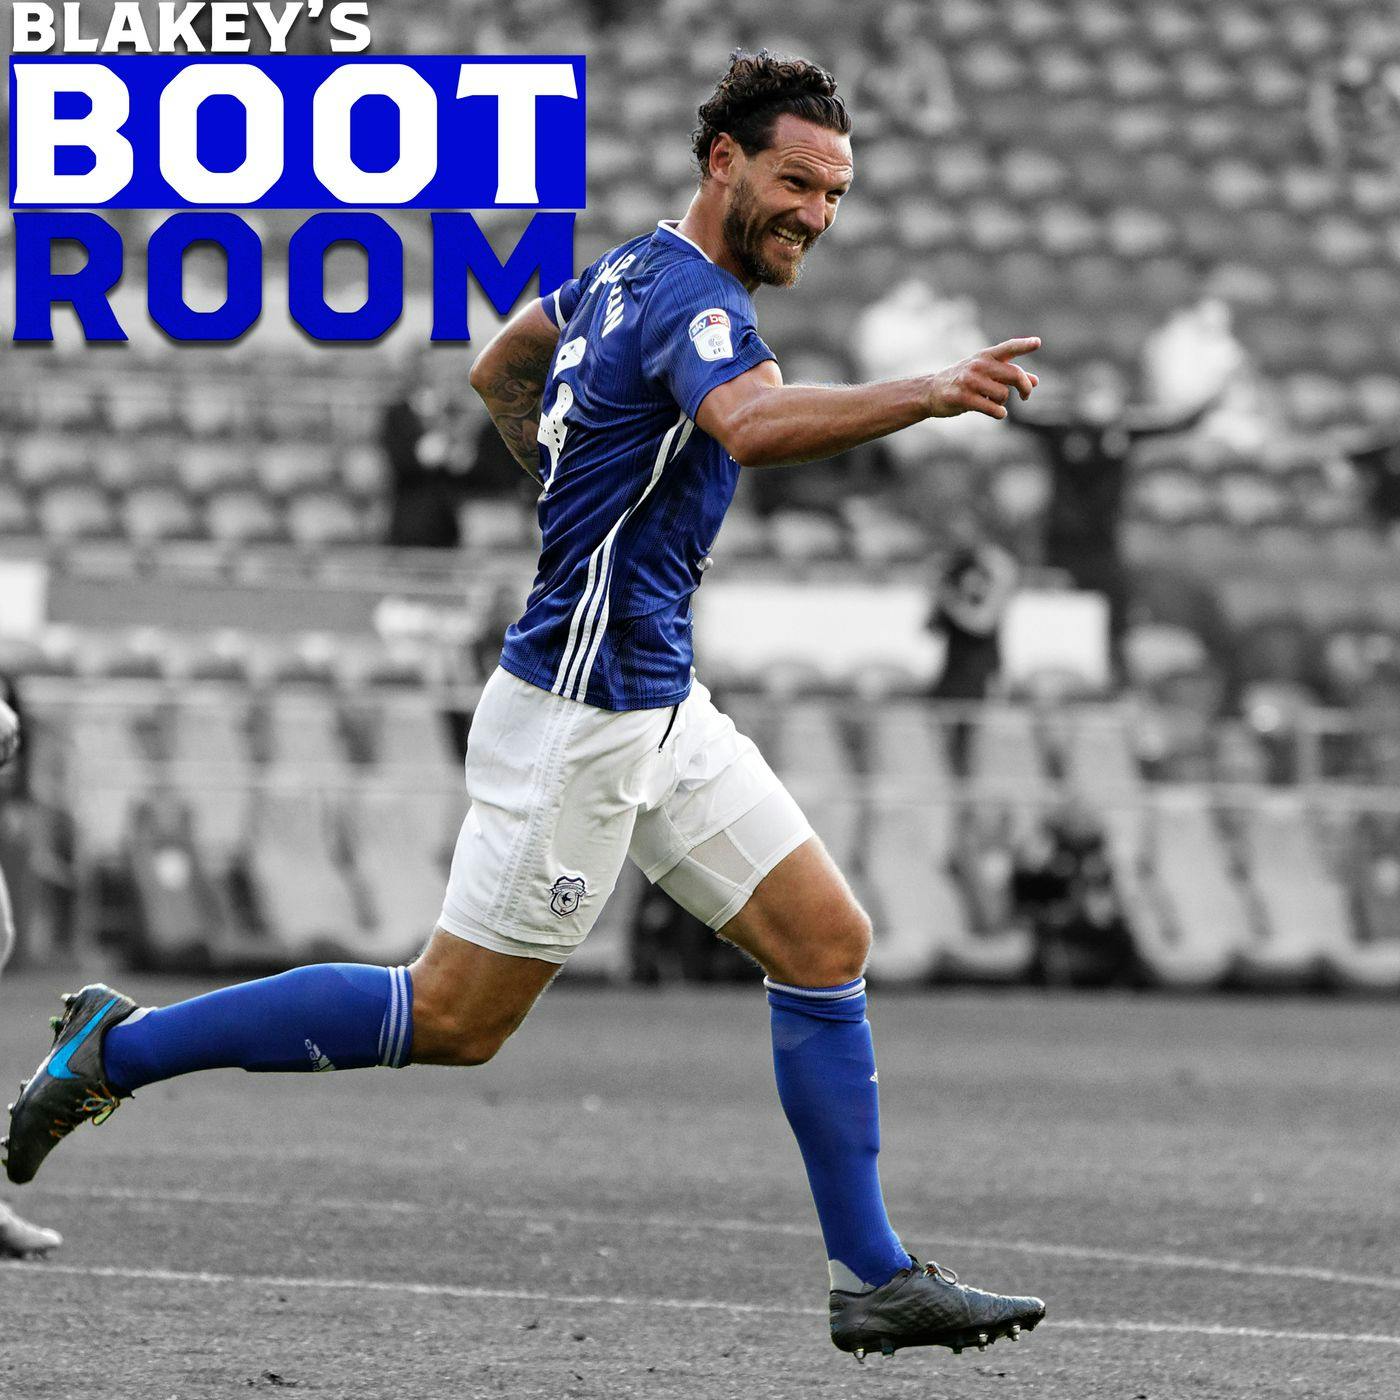 Blakey’s Bootroom podcast: Cardiff City’s romp to the play-offs and how the Bluebirds can beat Fulham